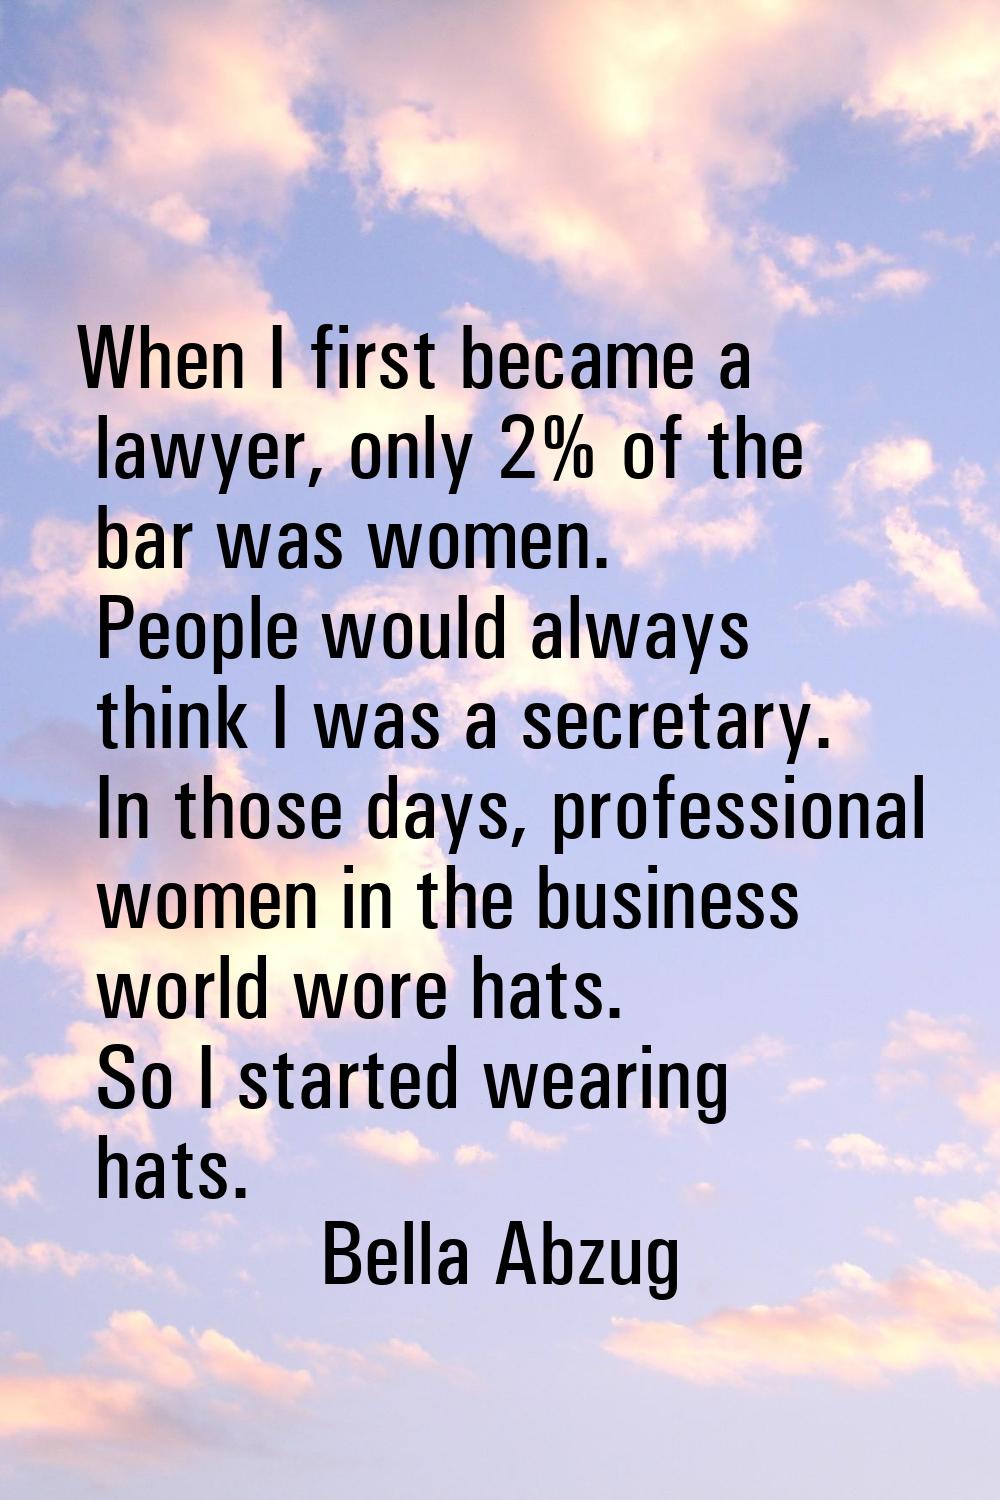 When I first became a lawyer, only 2% of the bar was women. People would always think I was a secre